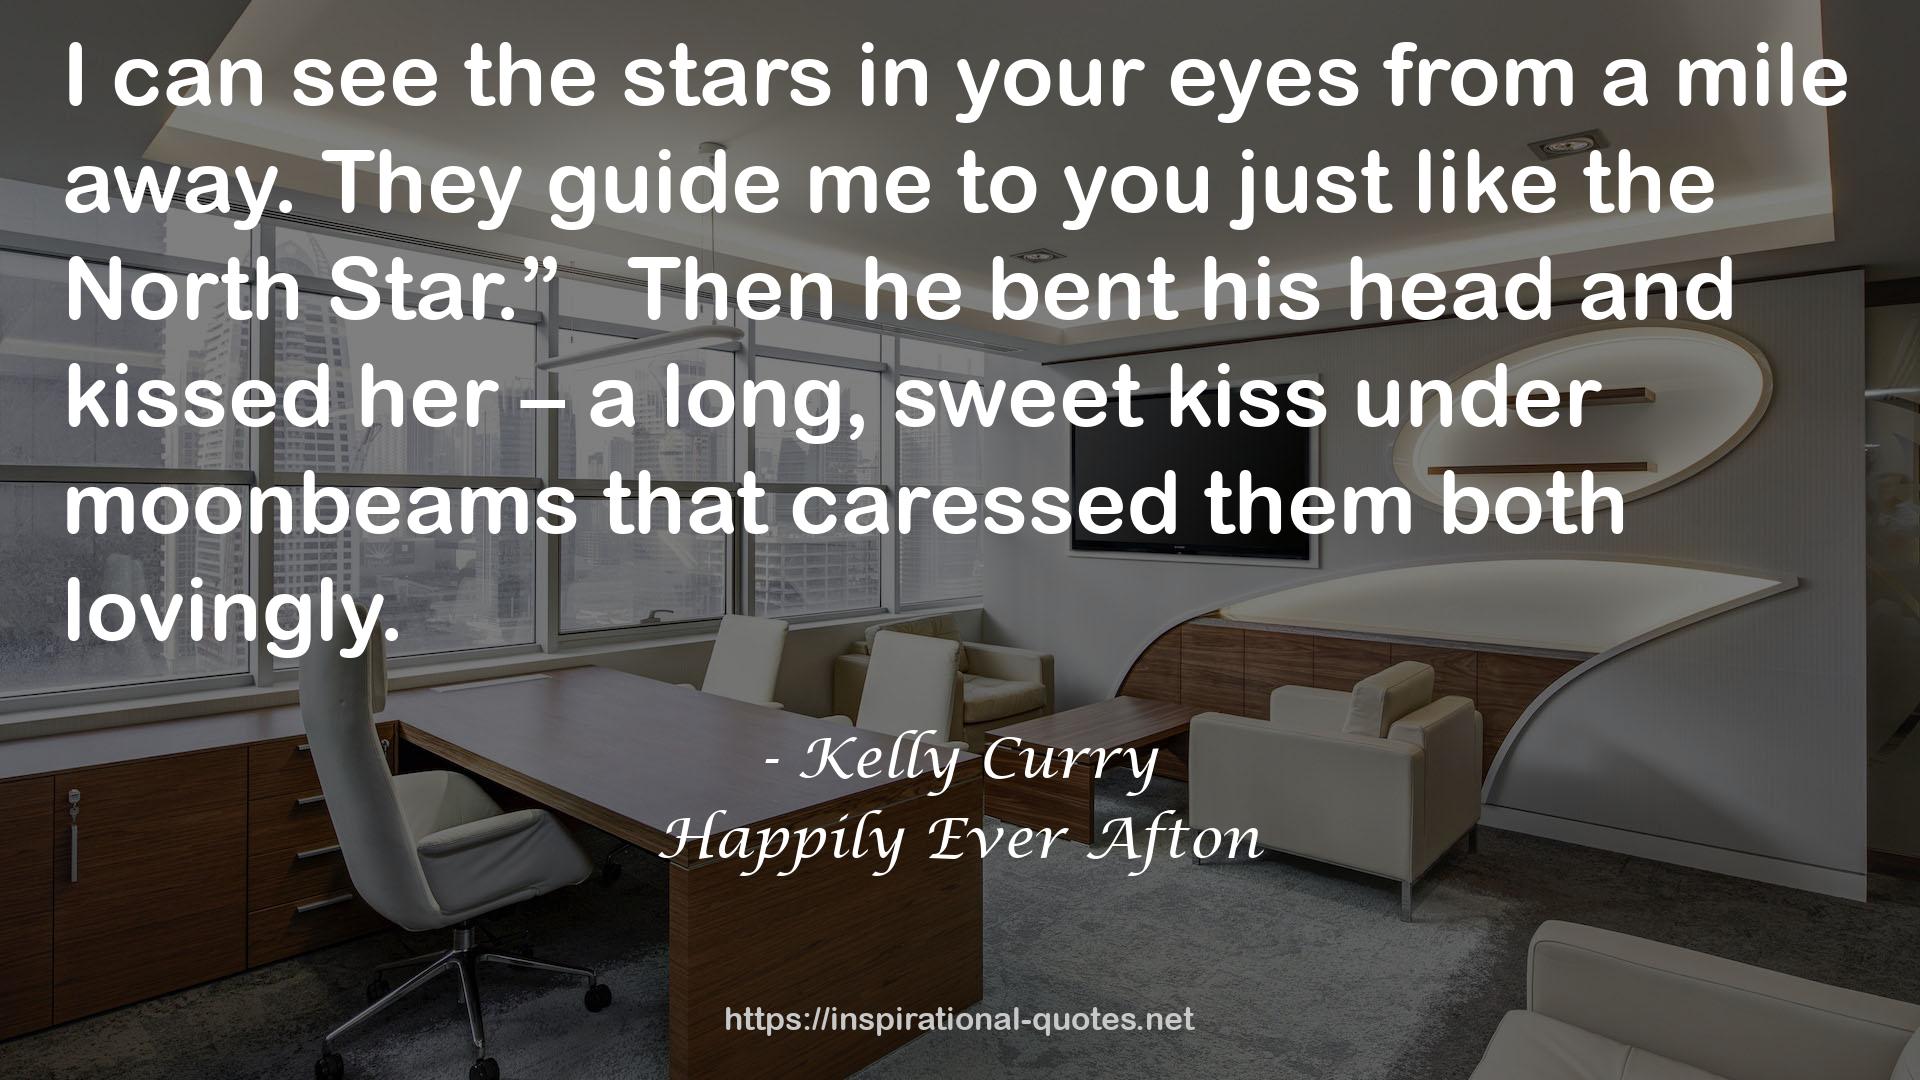 Kelly Curry QUOTES